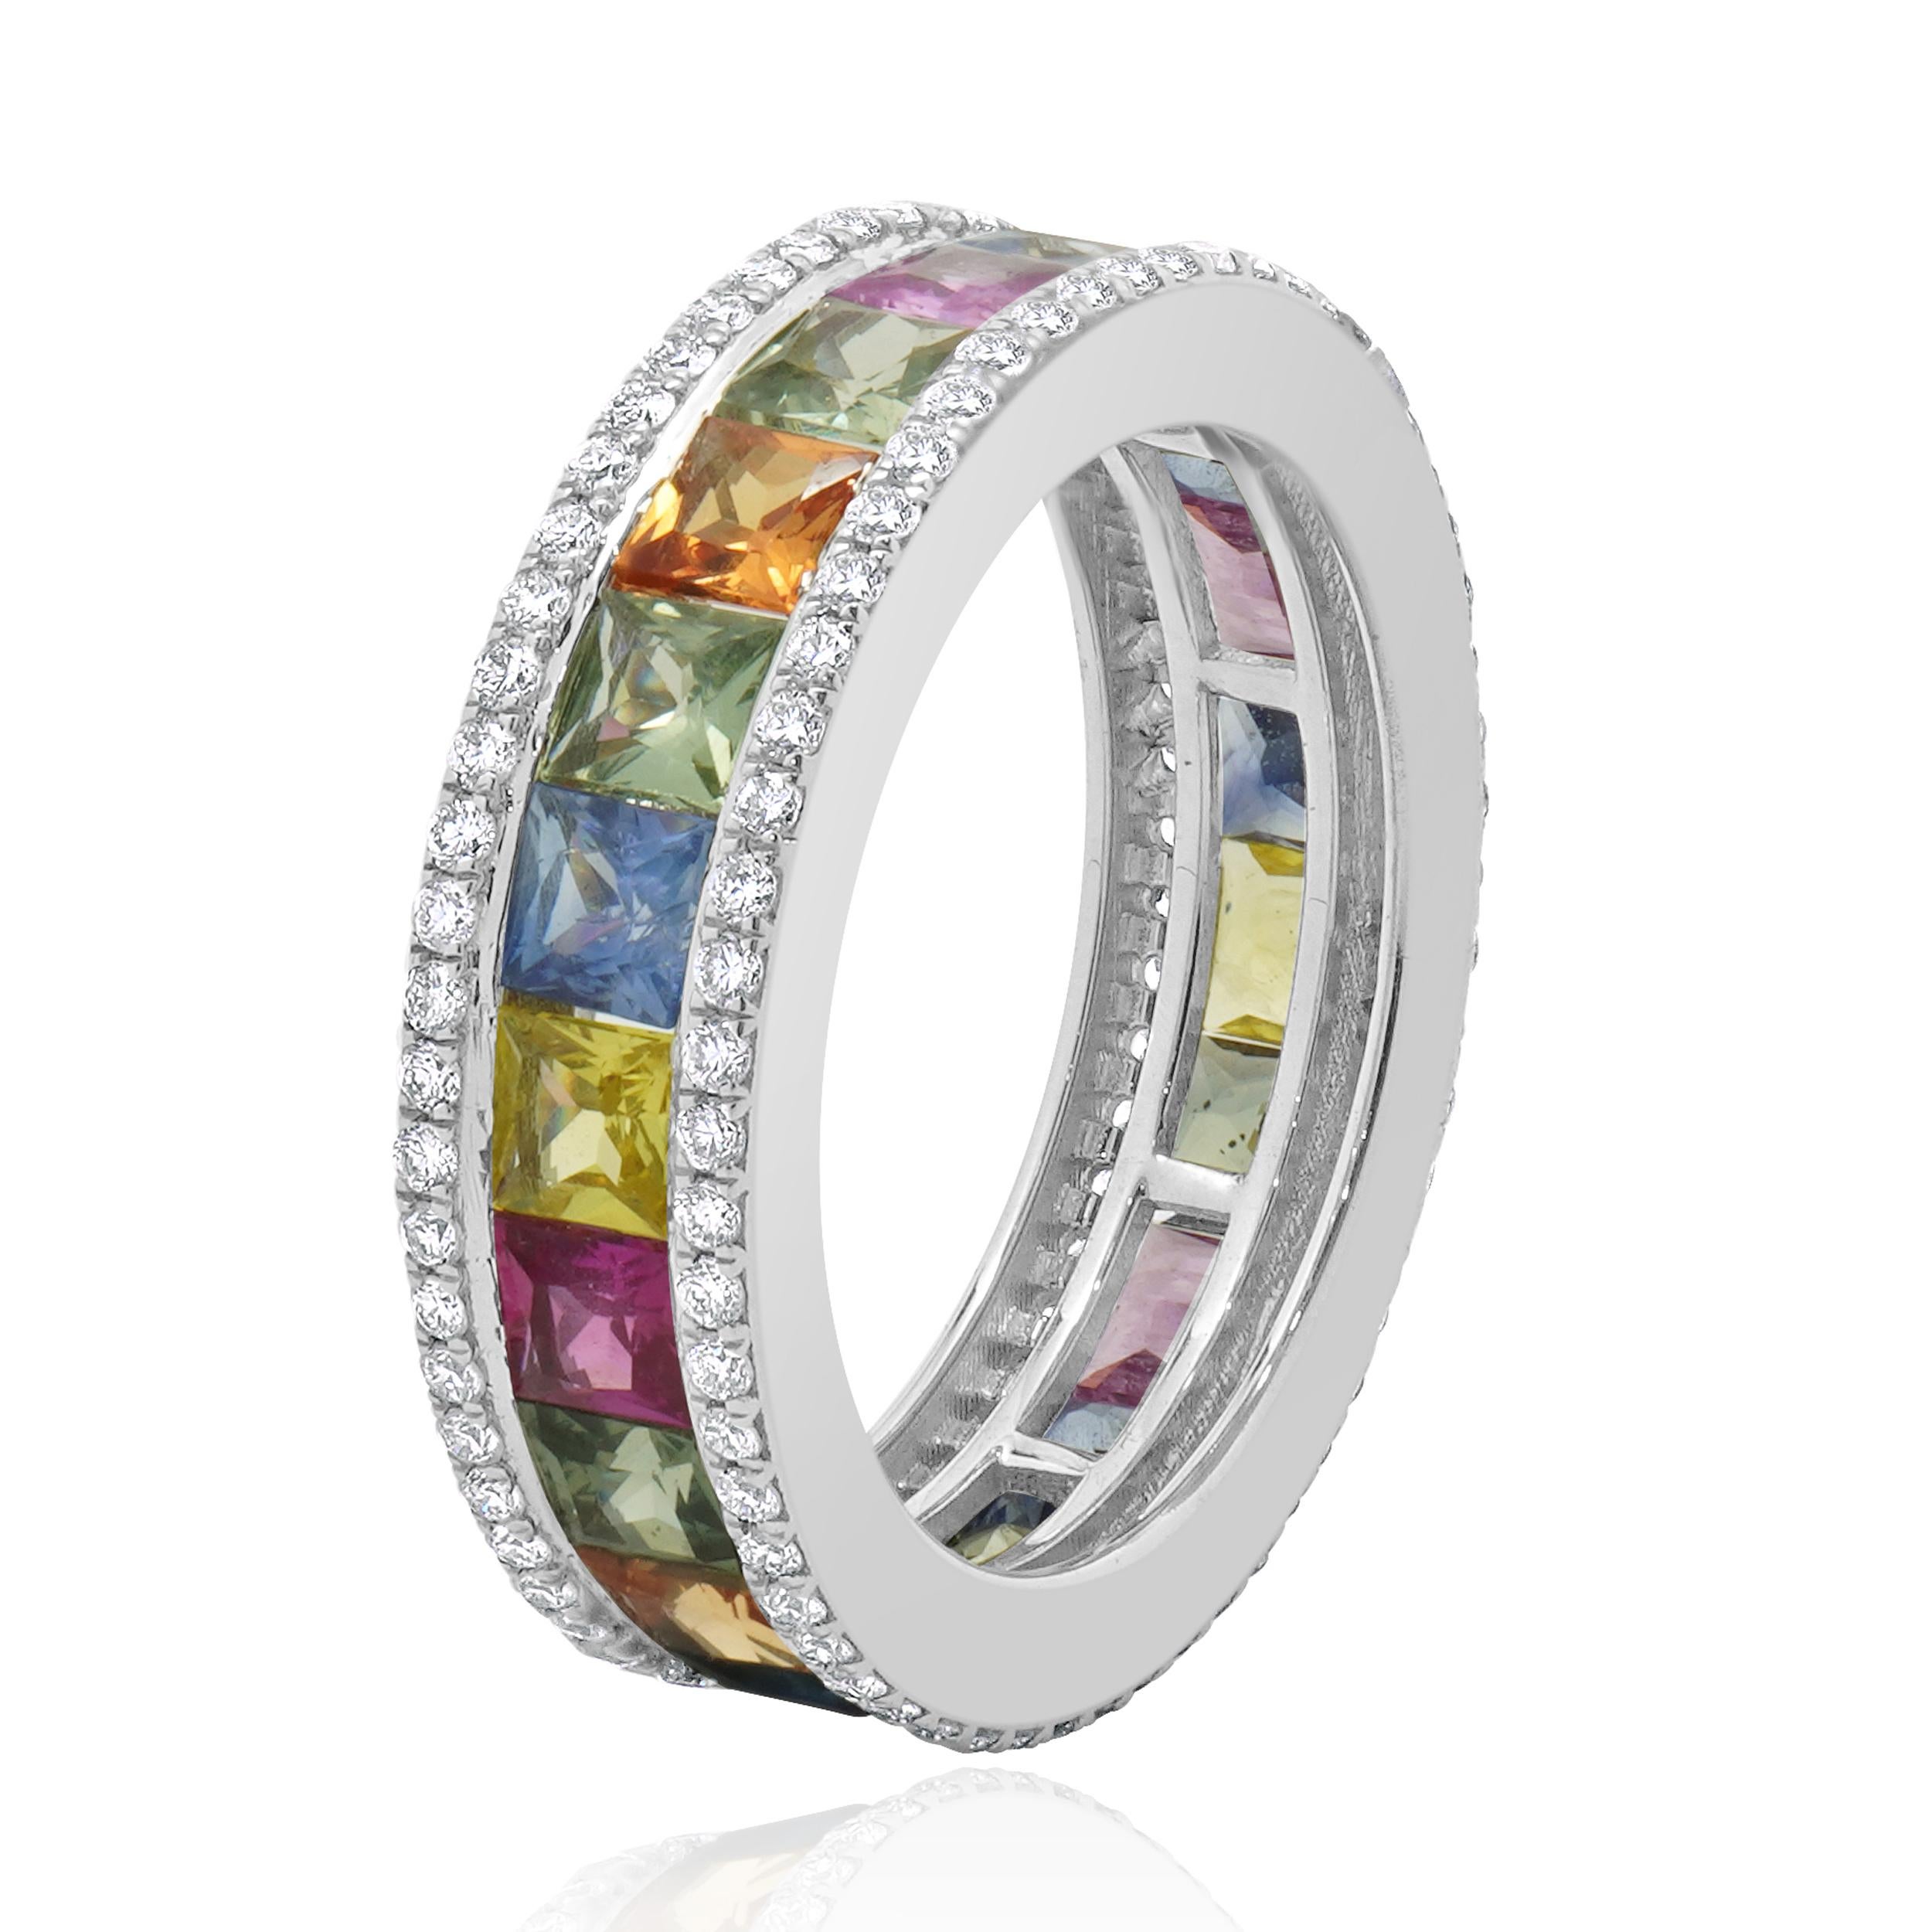 Designer: custom
Material: 14k white gold
Diamonds: round brilliant= 0.61cttw 
Color: G
Clarity: VS-SI1
Rainbow Sapphires: 3.65cttw
Dimensions: ring top measures 6mm wide
Ring Size: 6 (complimentary sizing available)
Weight: 4.61 grams
